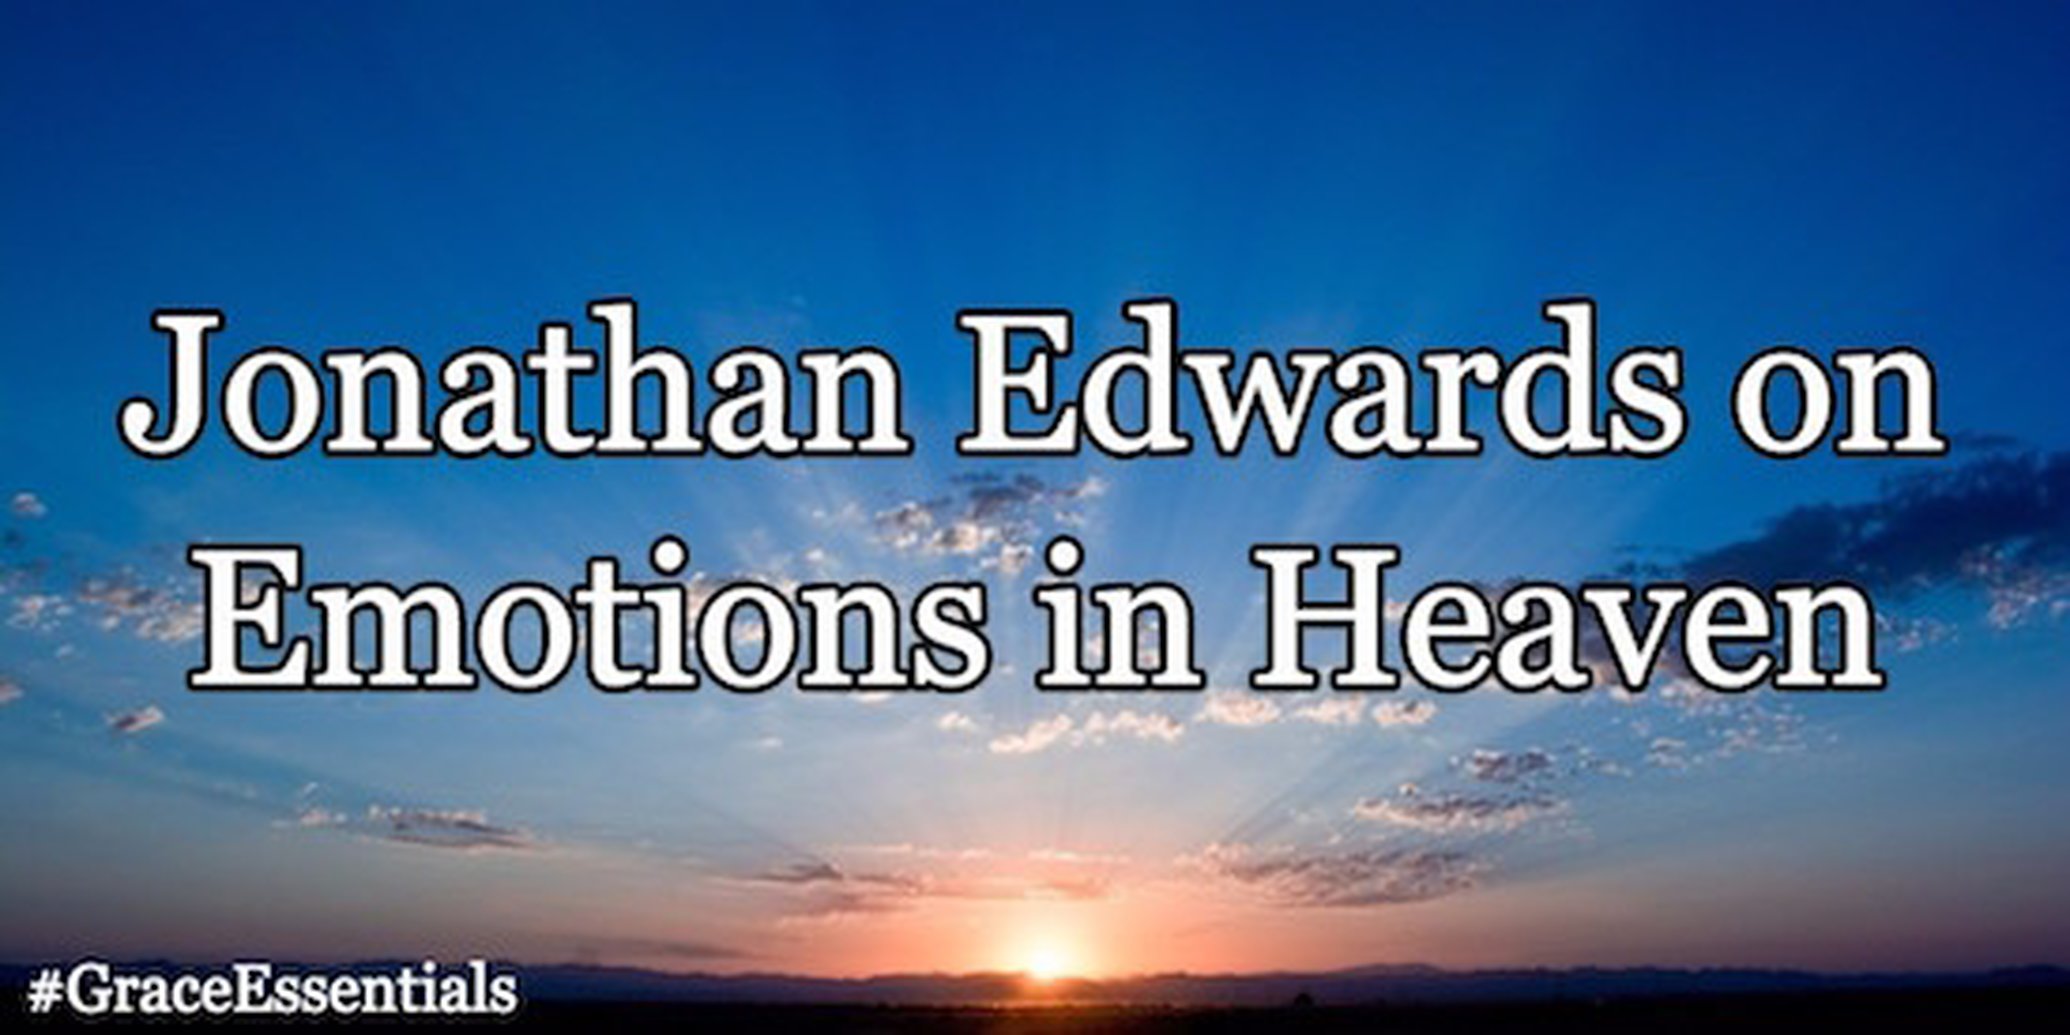 Jonathan Edwards on Emotions in Heaven